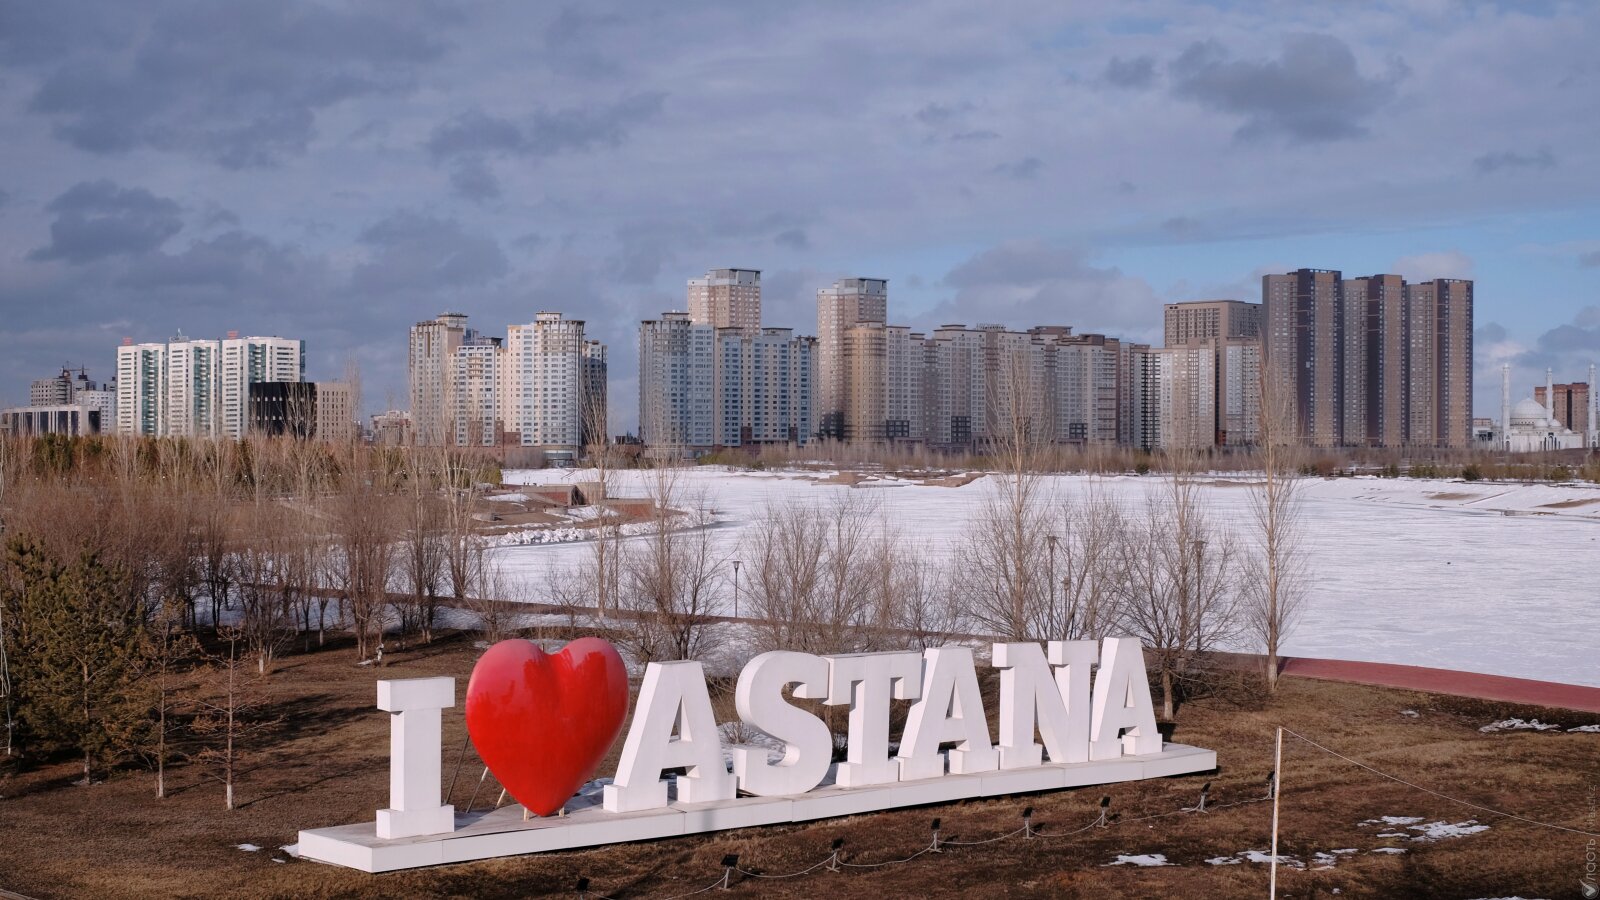 The Week in Kazakhstan: State Visits and Constitutional Changes